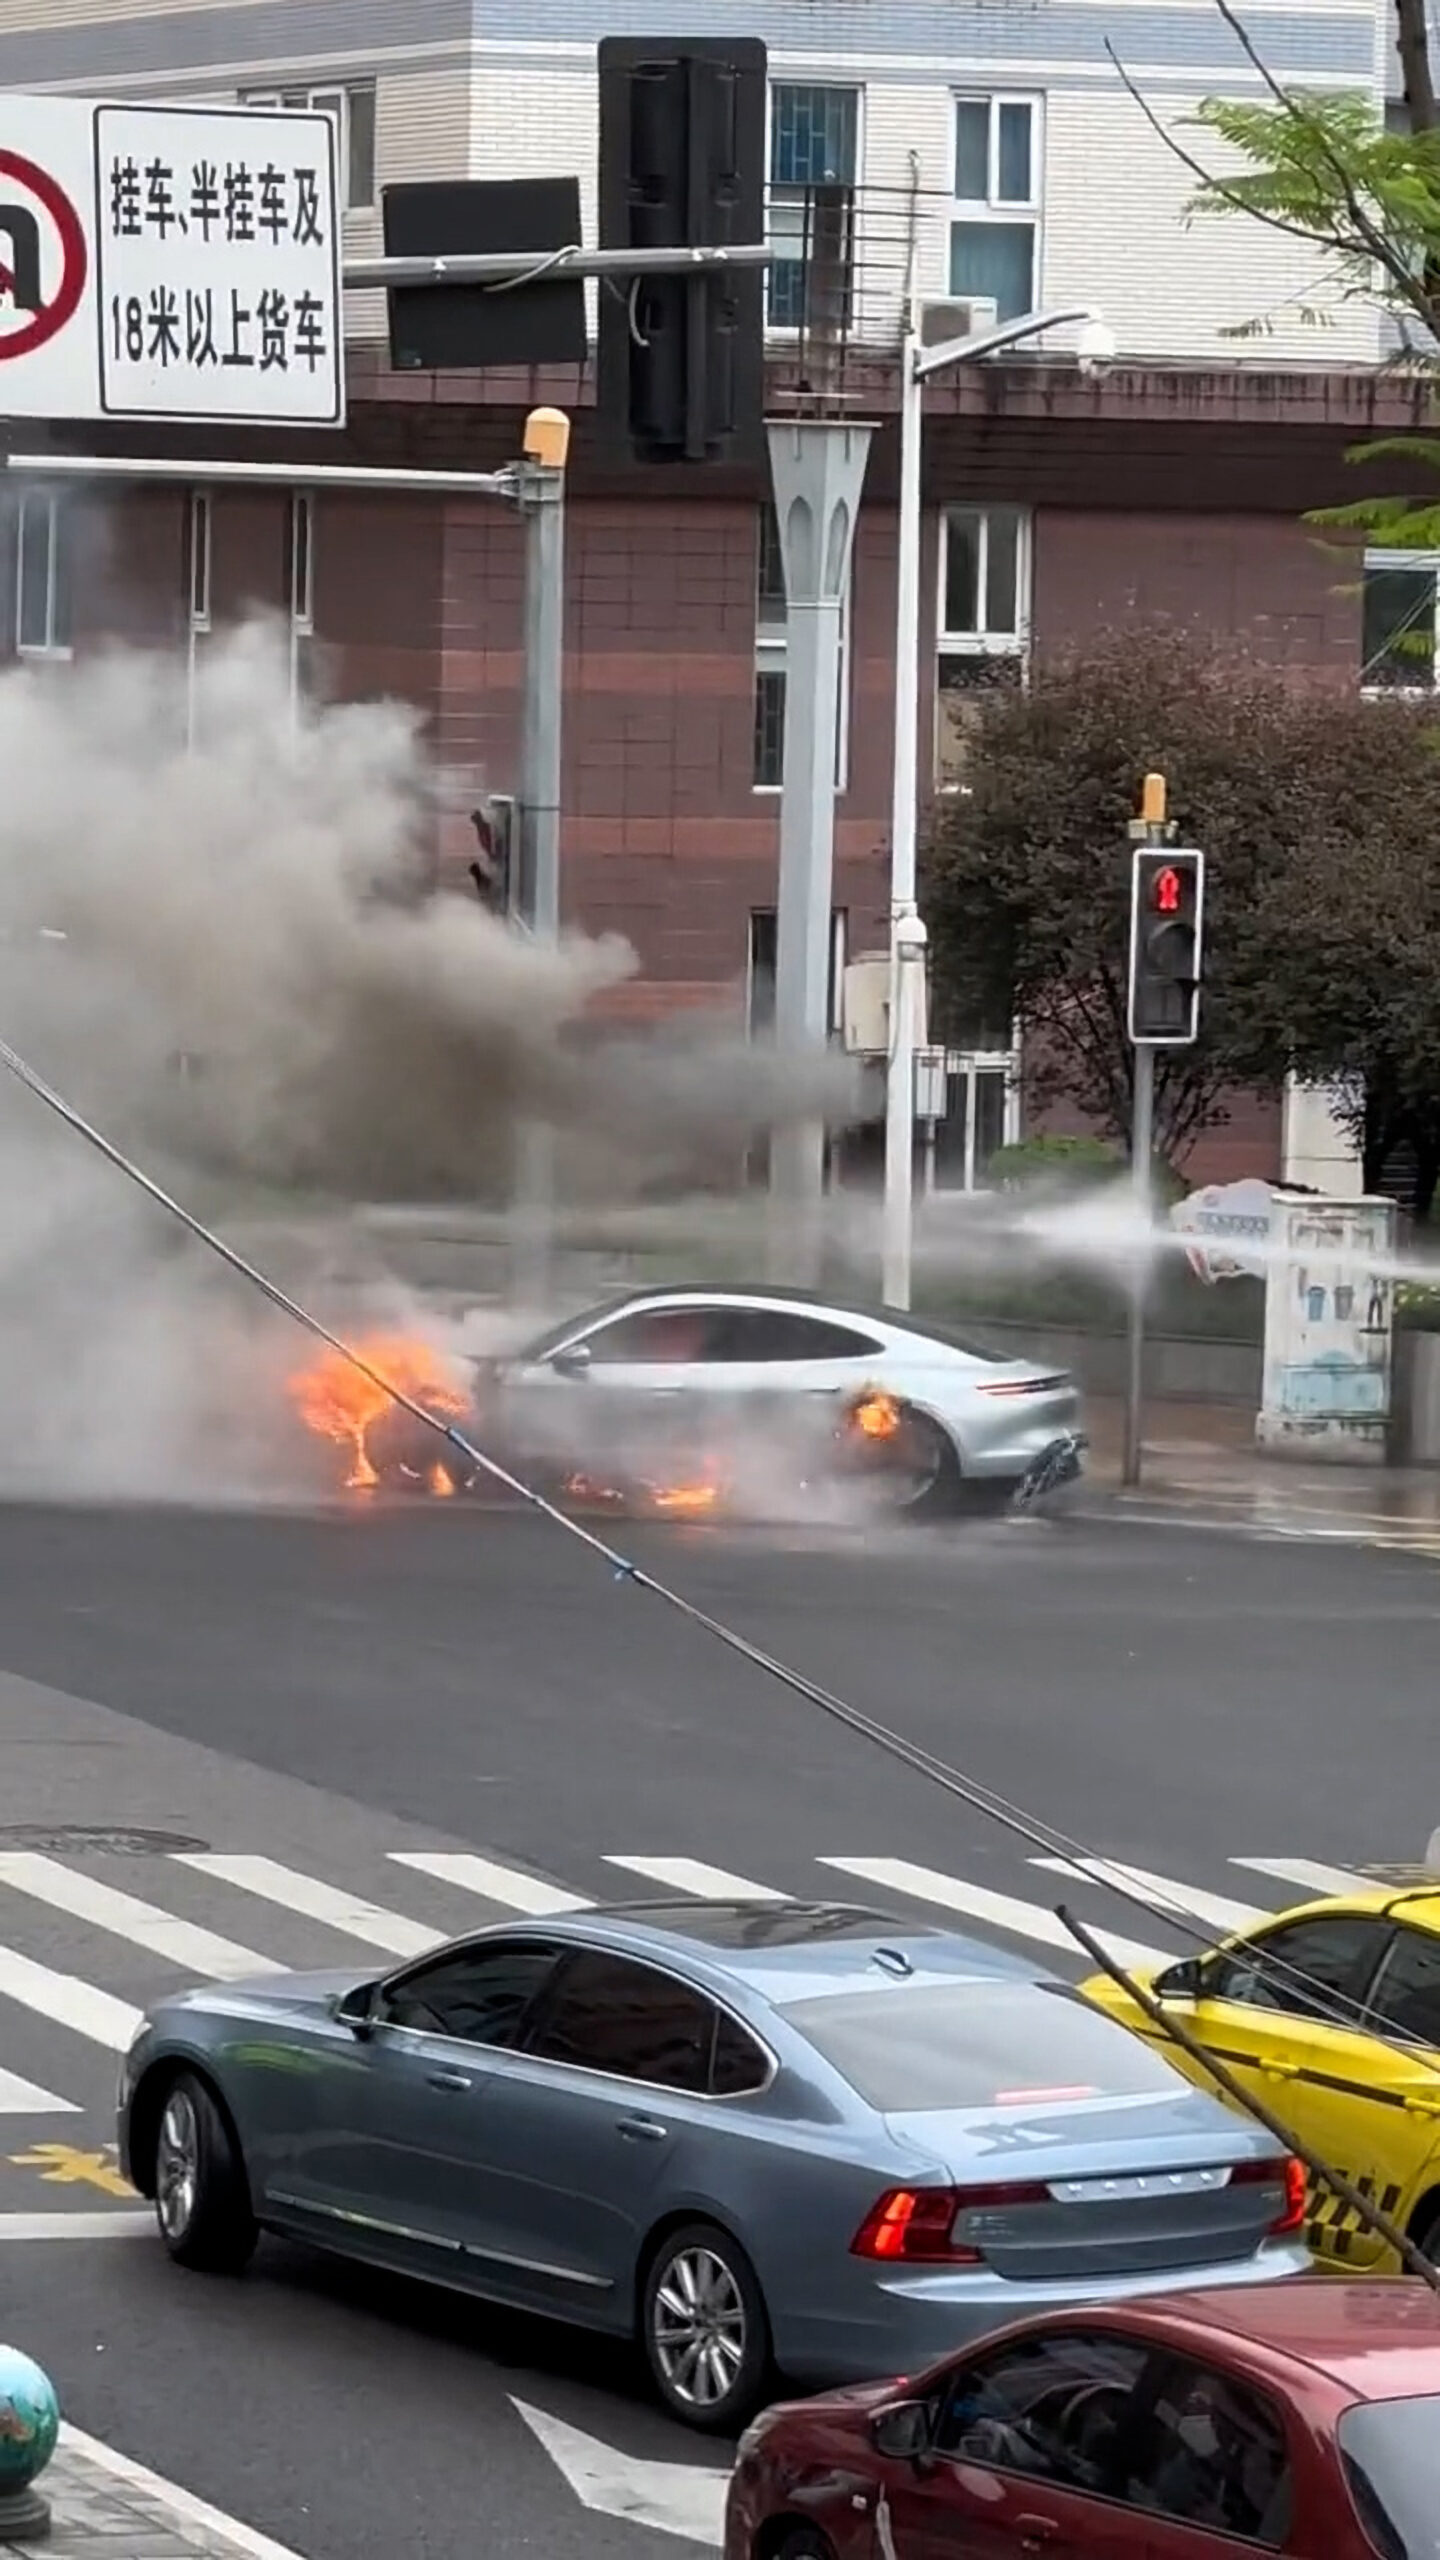 Lux GBP-200,000 Porsche Destroyed By Fire In The Middle Of The Street